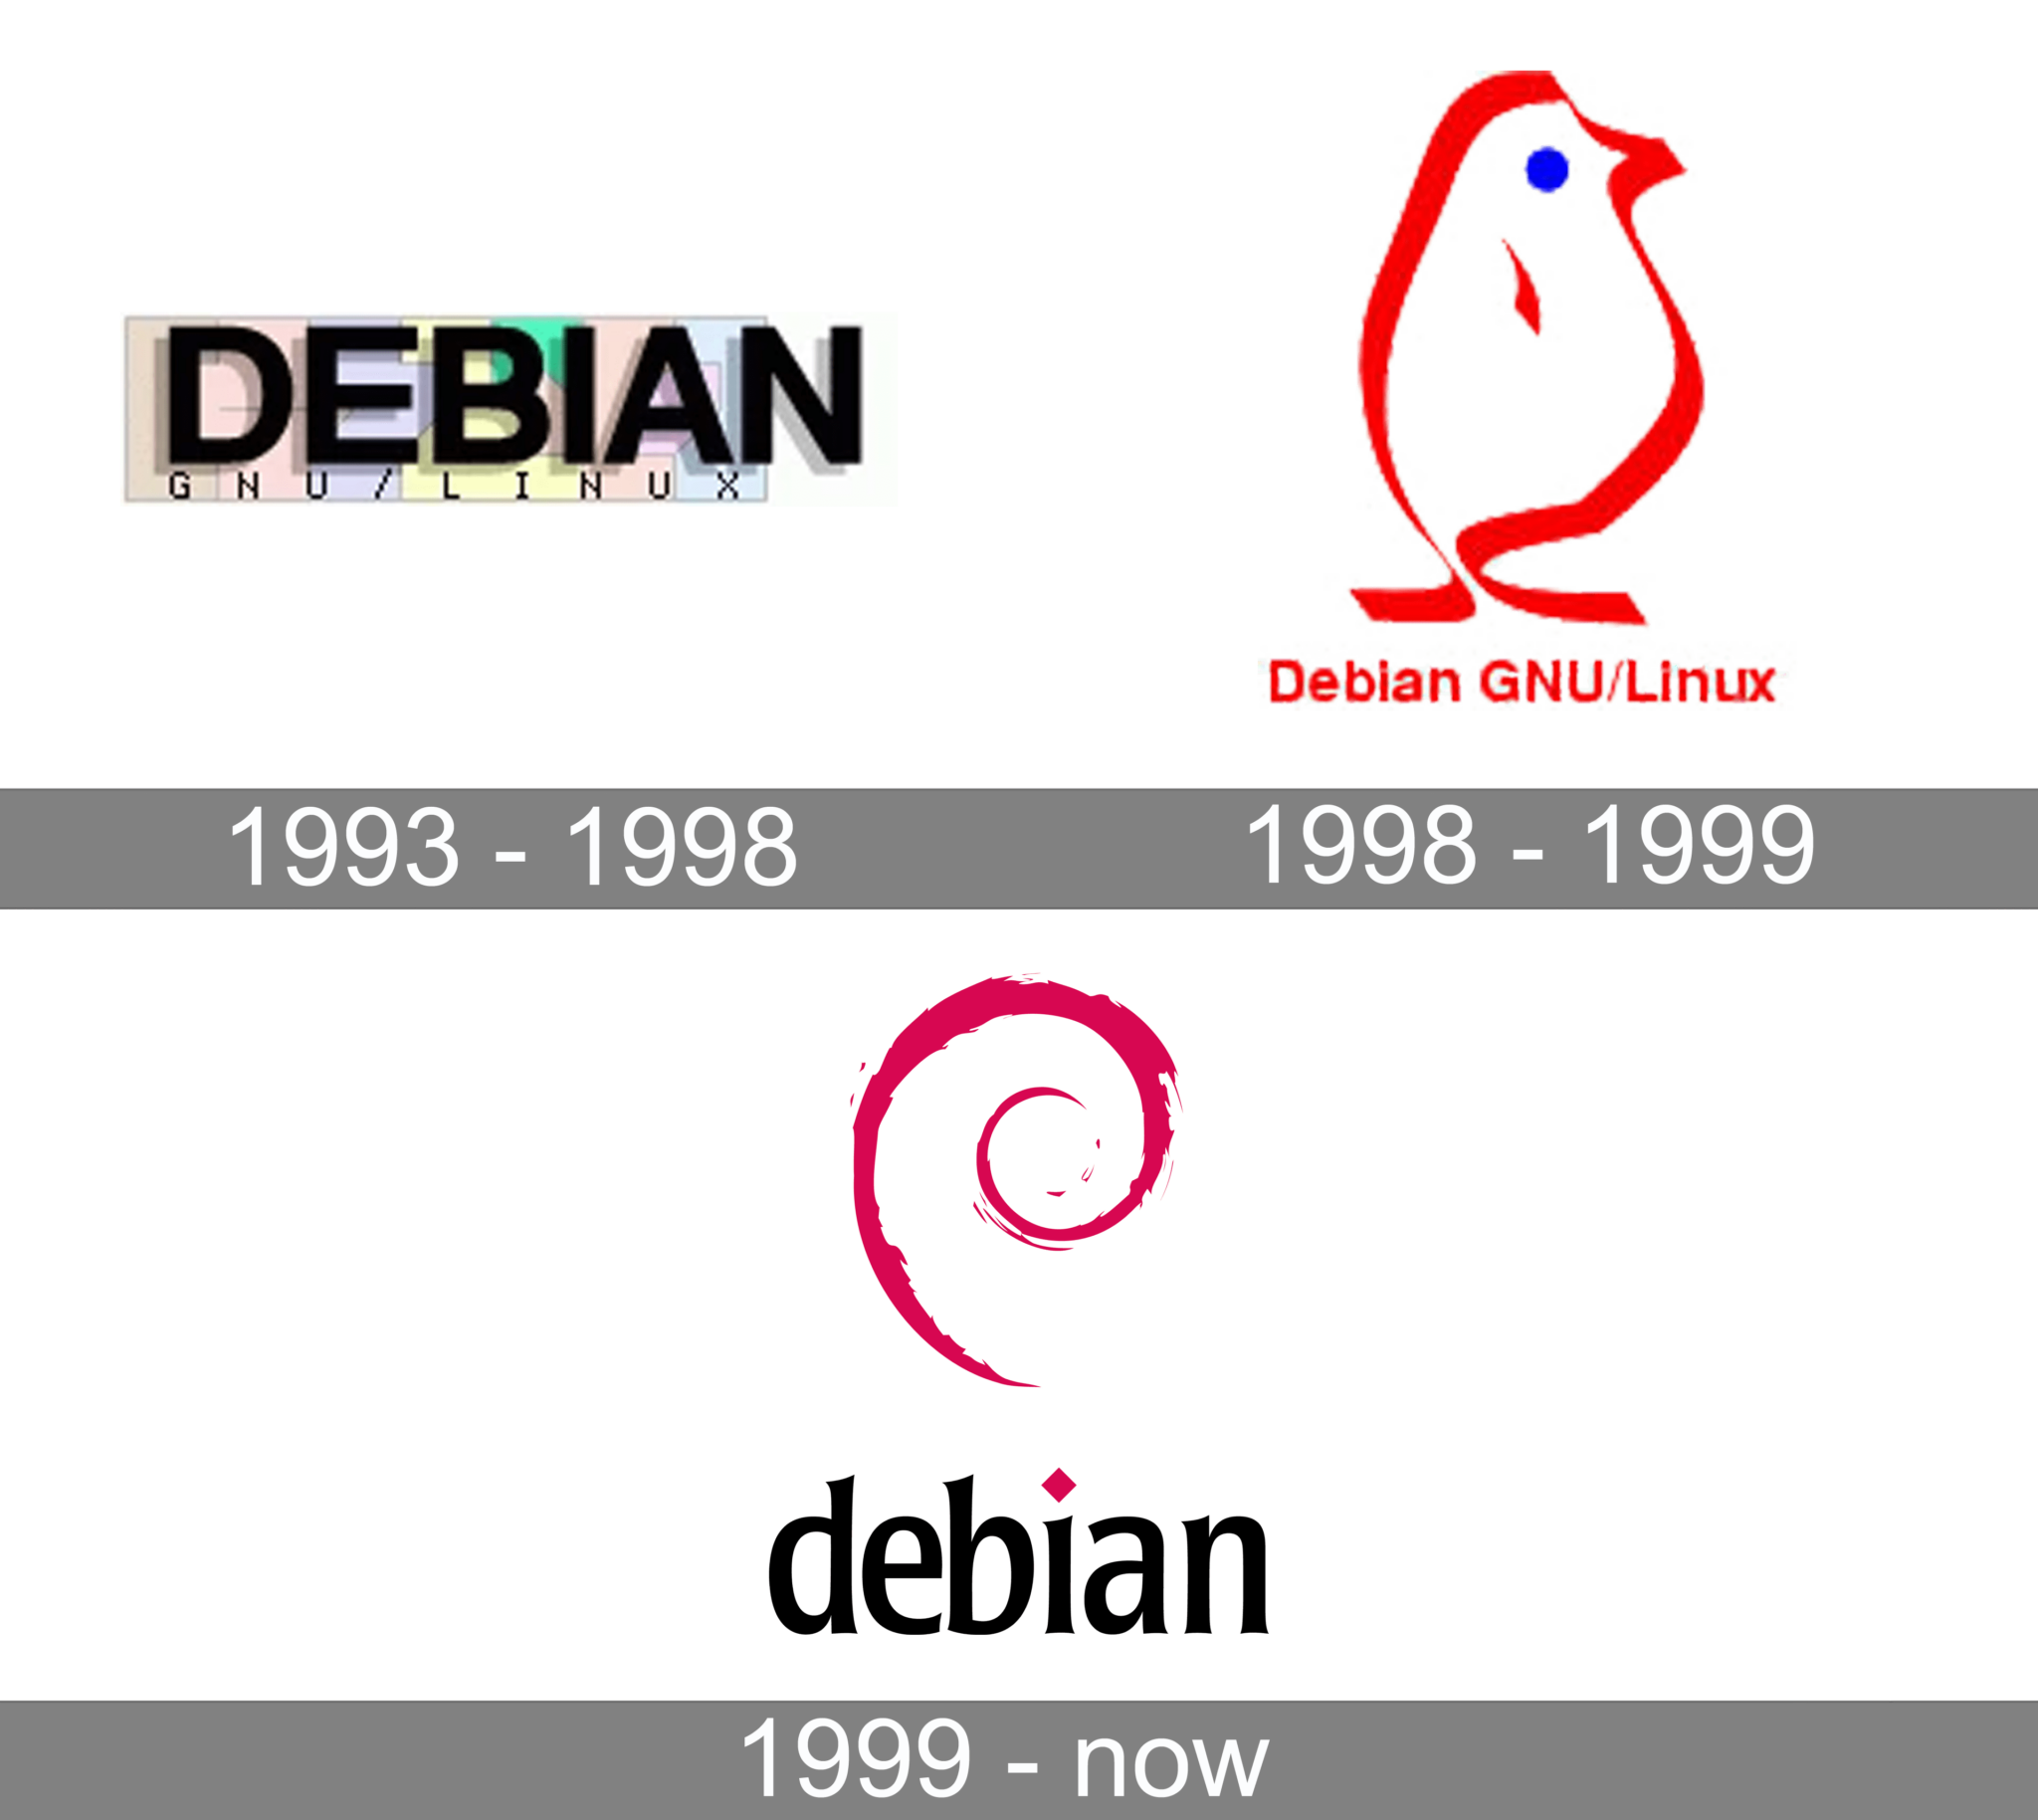 debian-logo-and-symbol-meaning-history-png